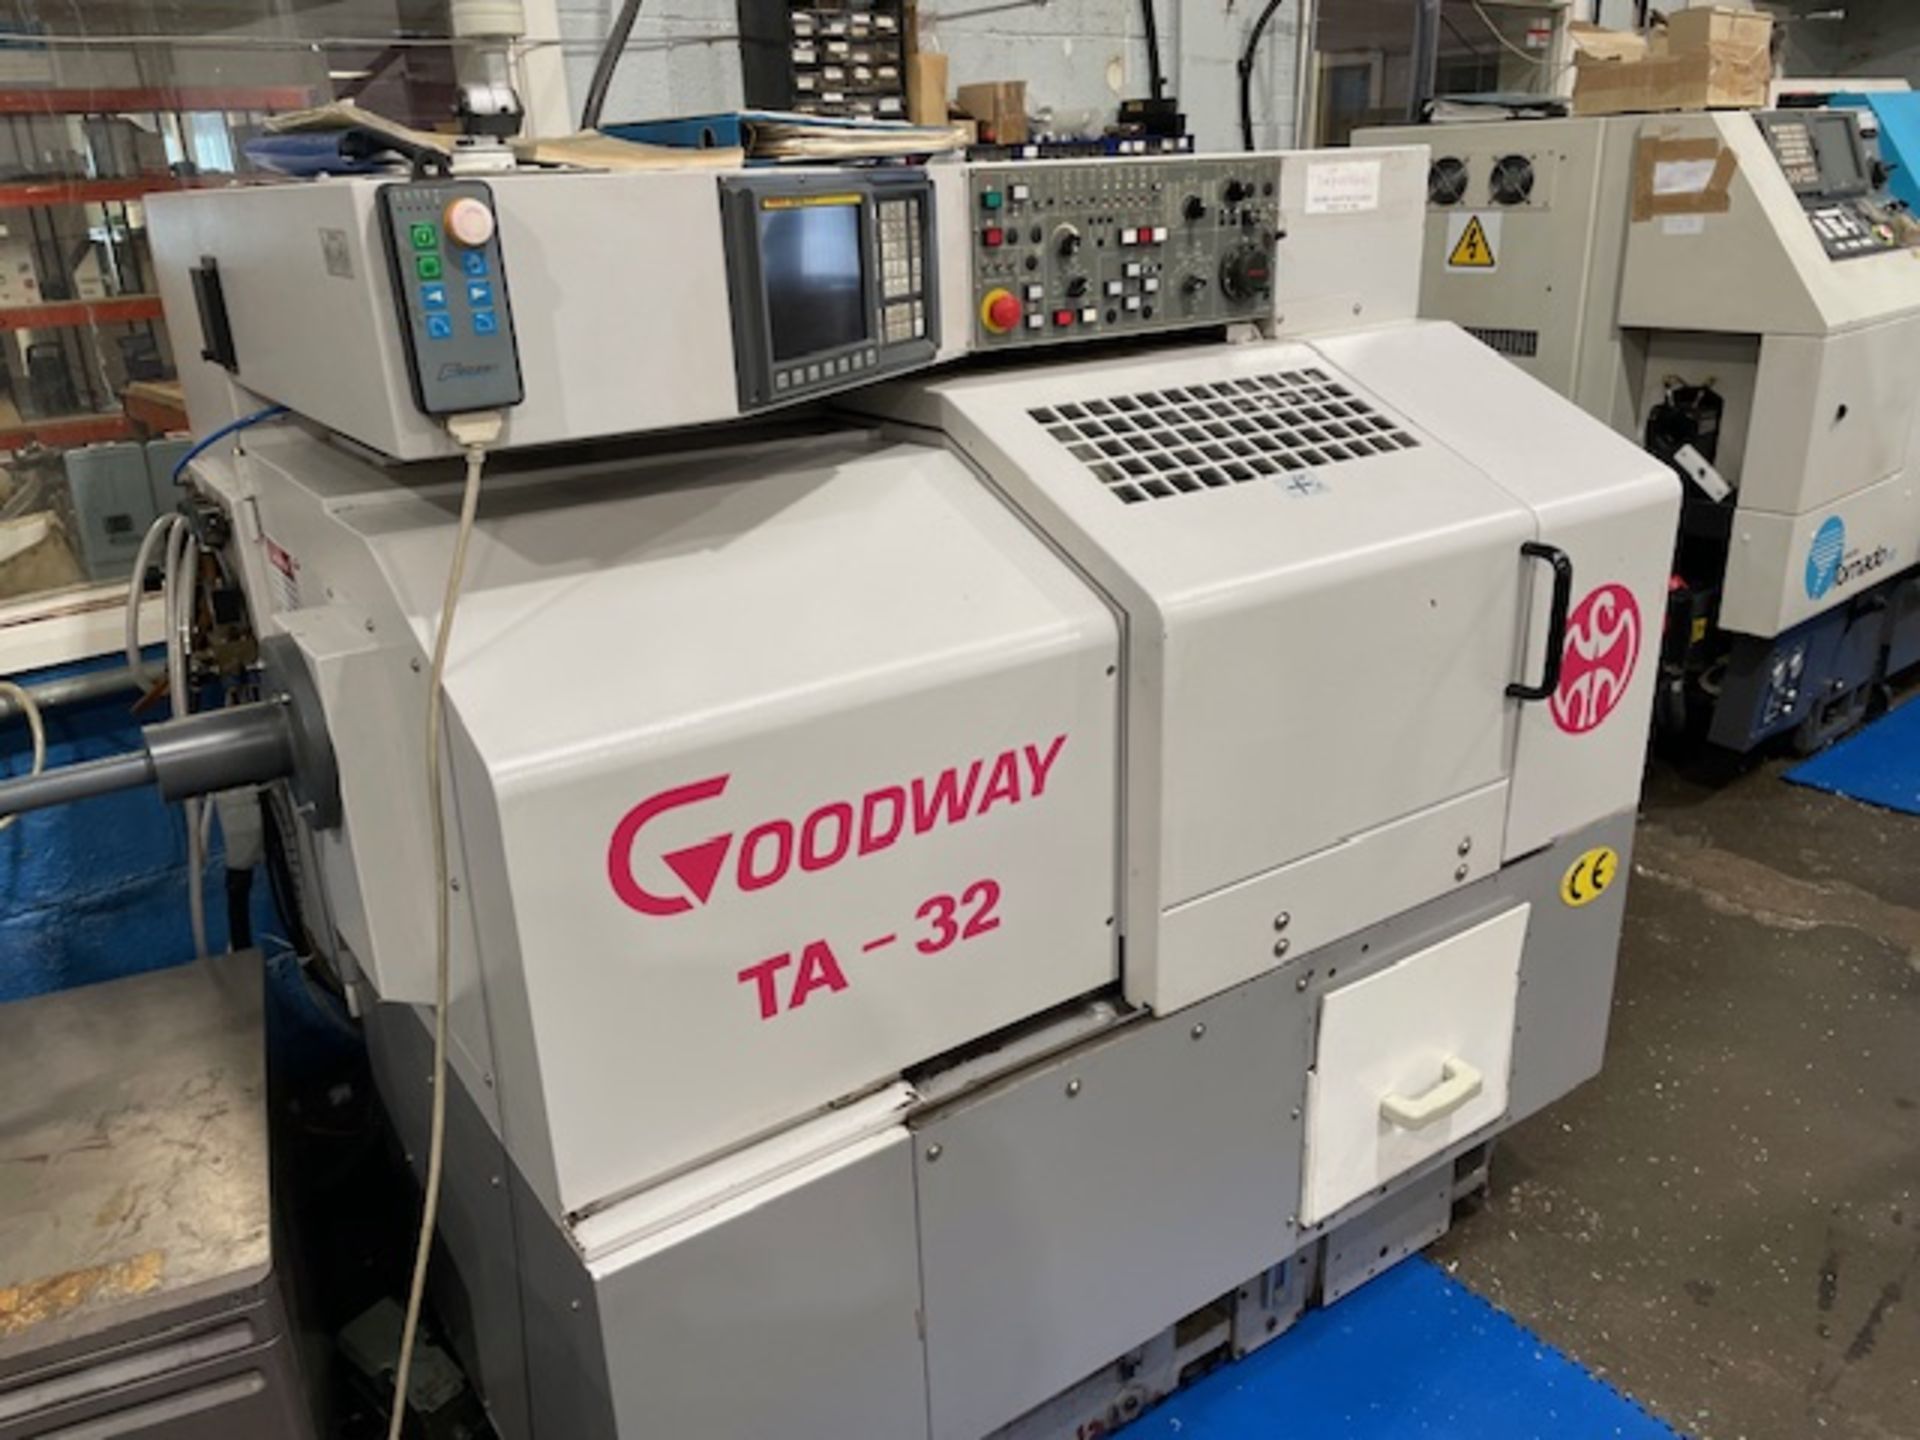 Goodway TA-32 CNC Lathe (2002) Serial Number 81692 with Goodway BF-654 Bar Feed (Location: Earls - Image 4 of 10